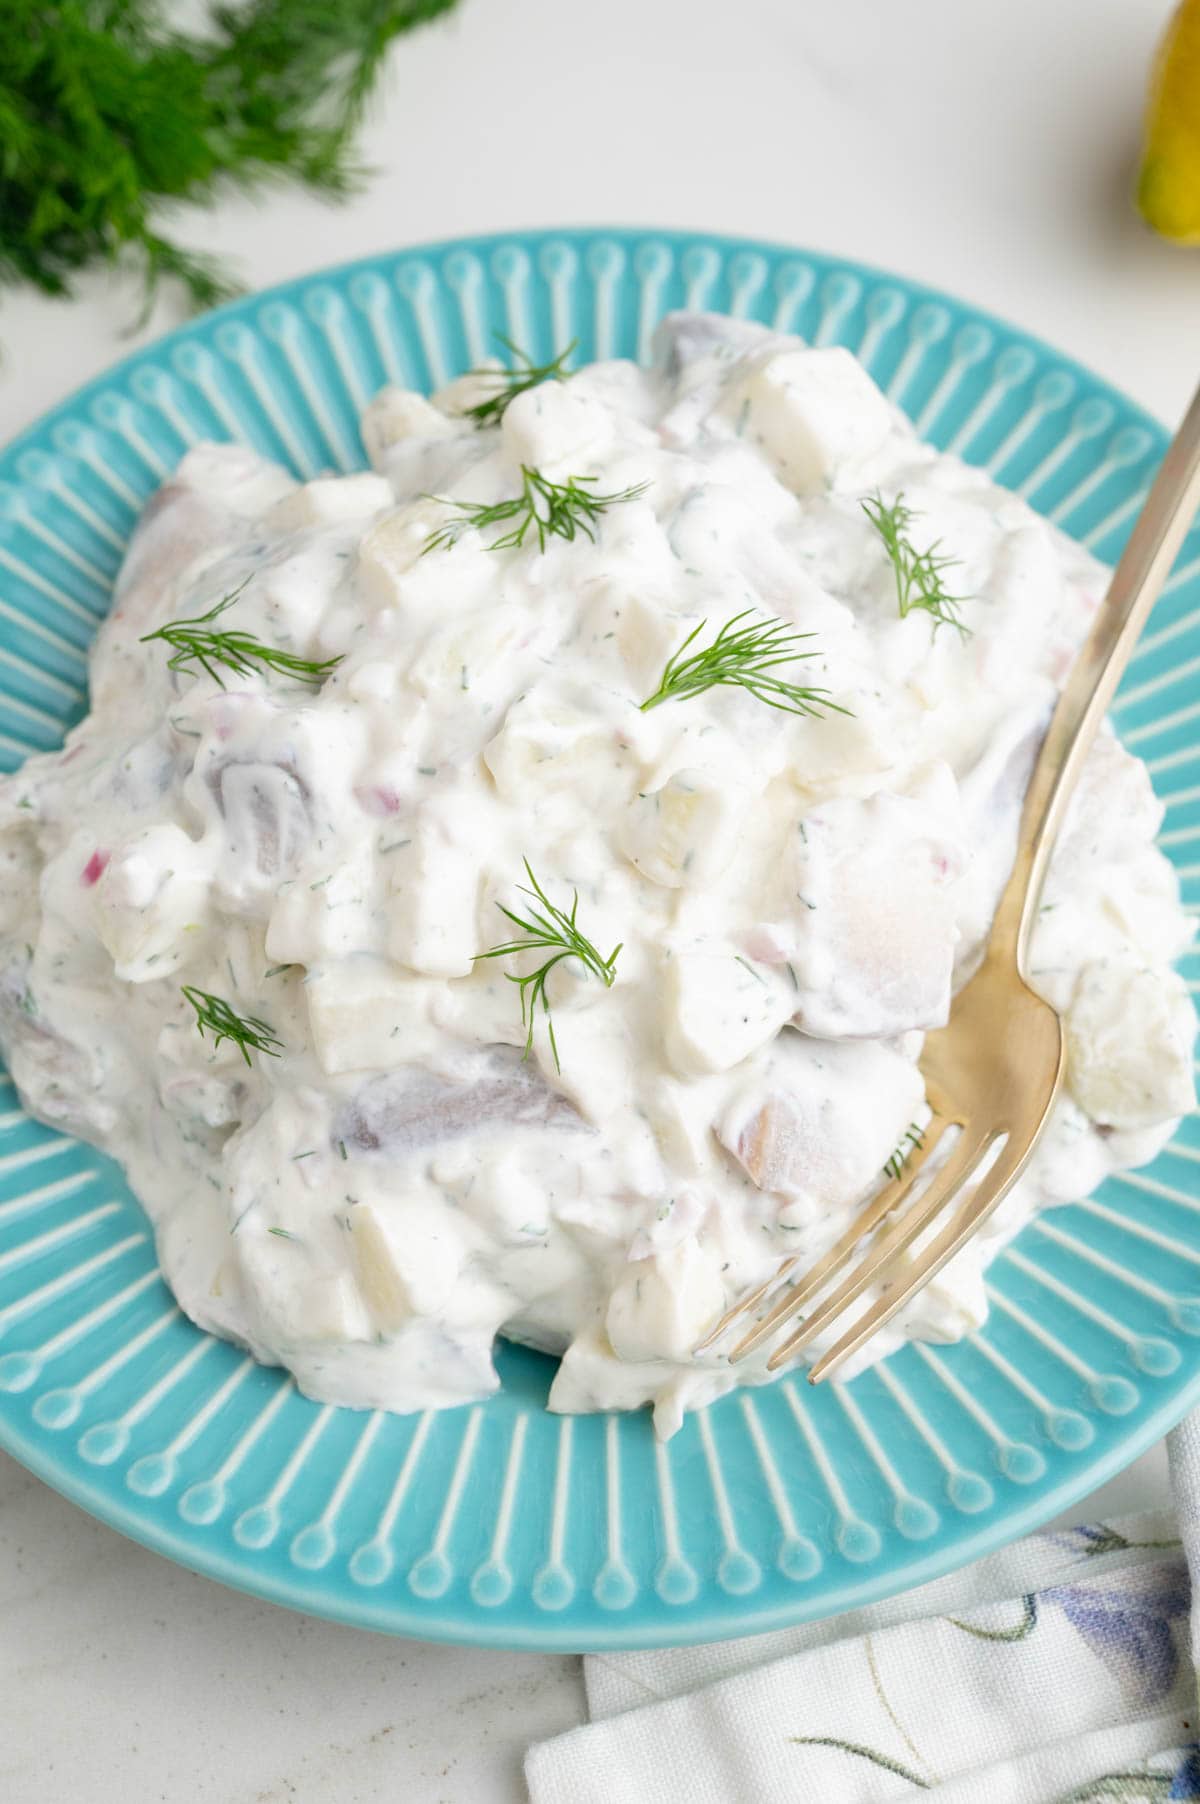 Herring in Cream Sauce on a blue plate.